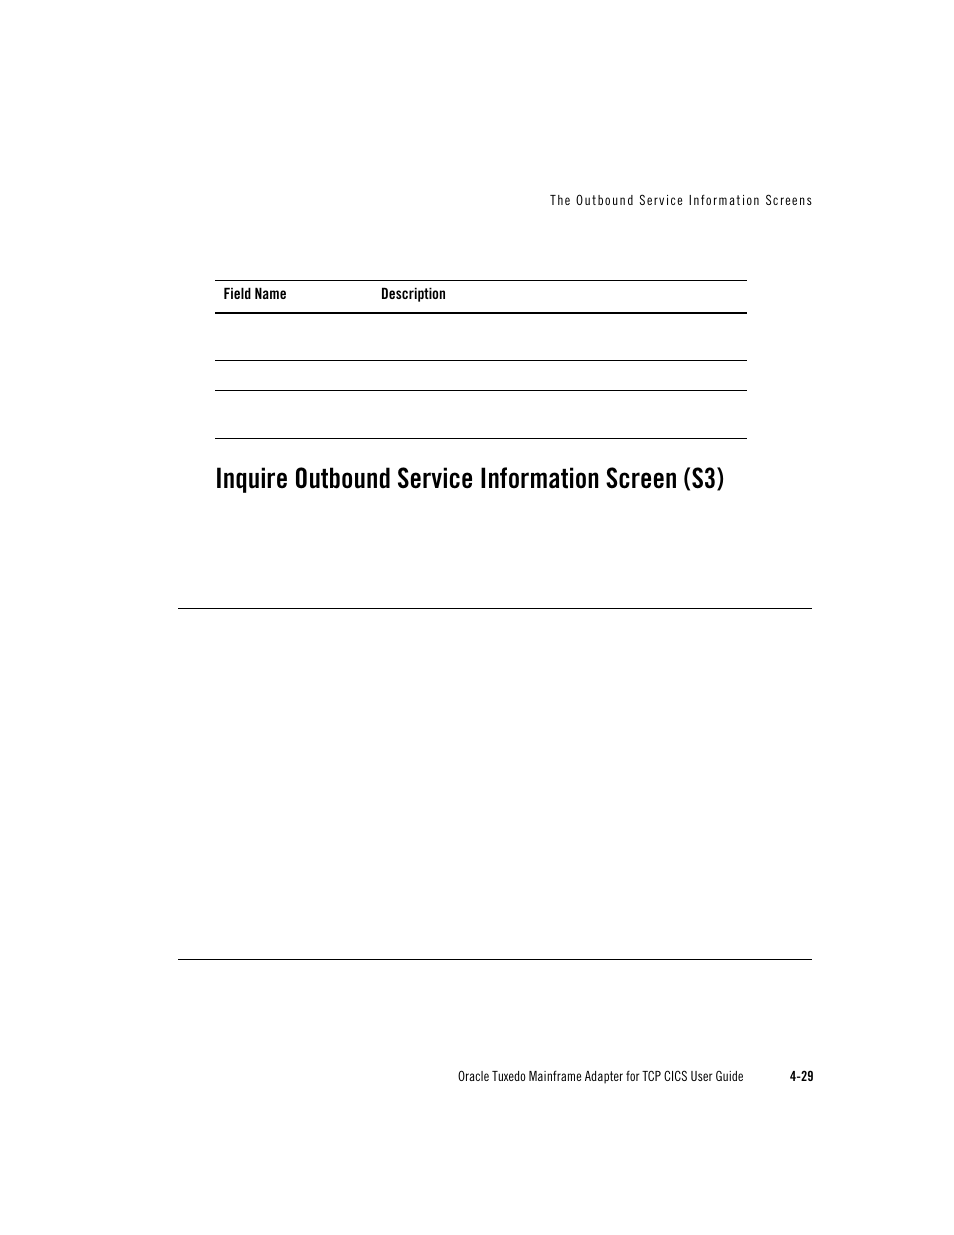 Inquire outbound service information screen (s3) | Oracle Audio Technologies Oracle Tuxedo User Manual | Page 63 / 112